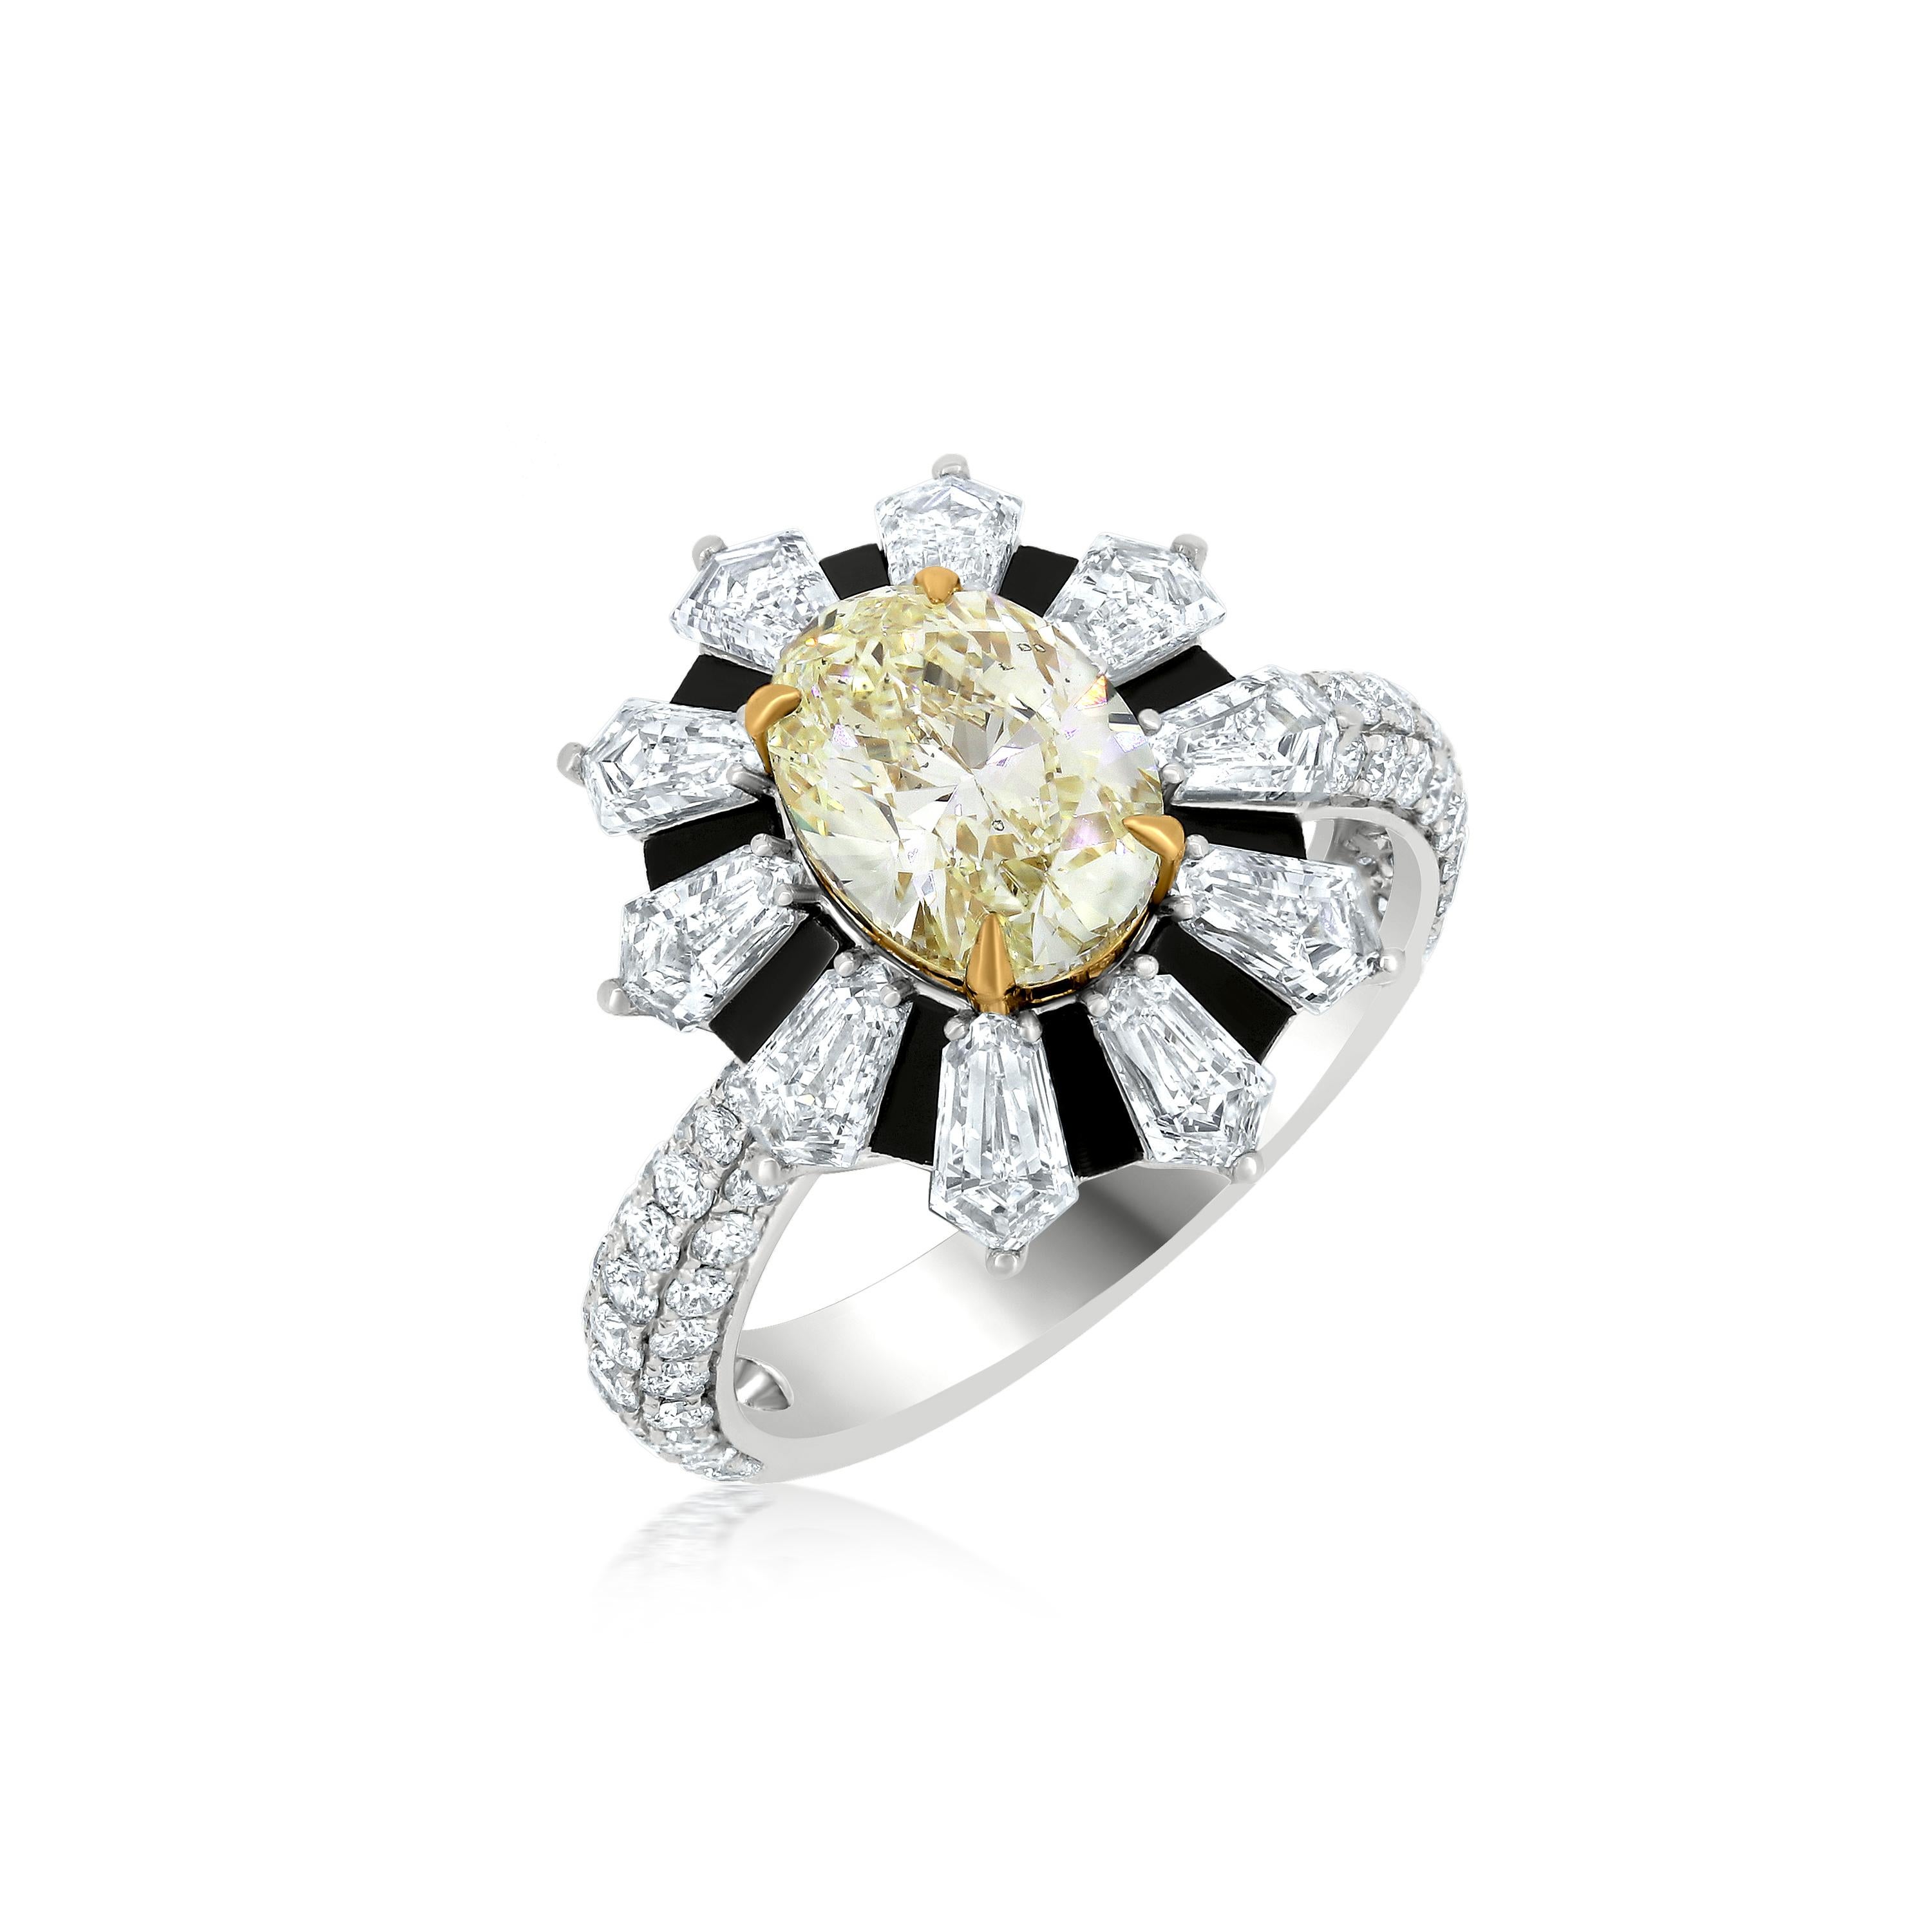 A 2.0 carats CGL certified oval yellow diamond prong set in yellow gold lends itself to a natural rising sun design. This master piece by Nigaam features an alternating Kite shaped diamonds and black enamel spread out form the center of the ring to